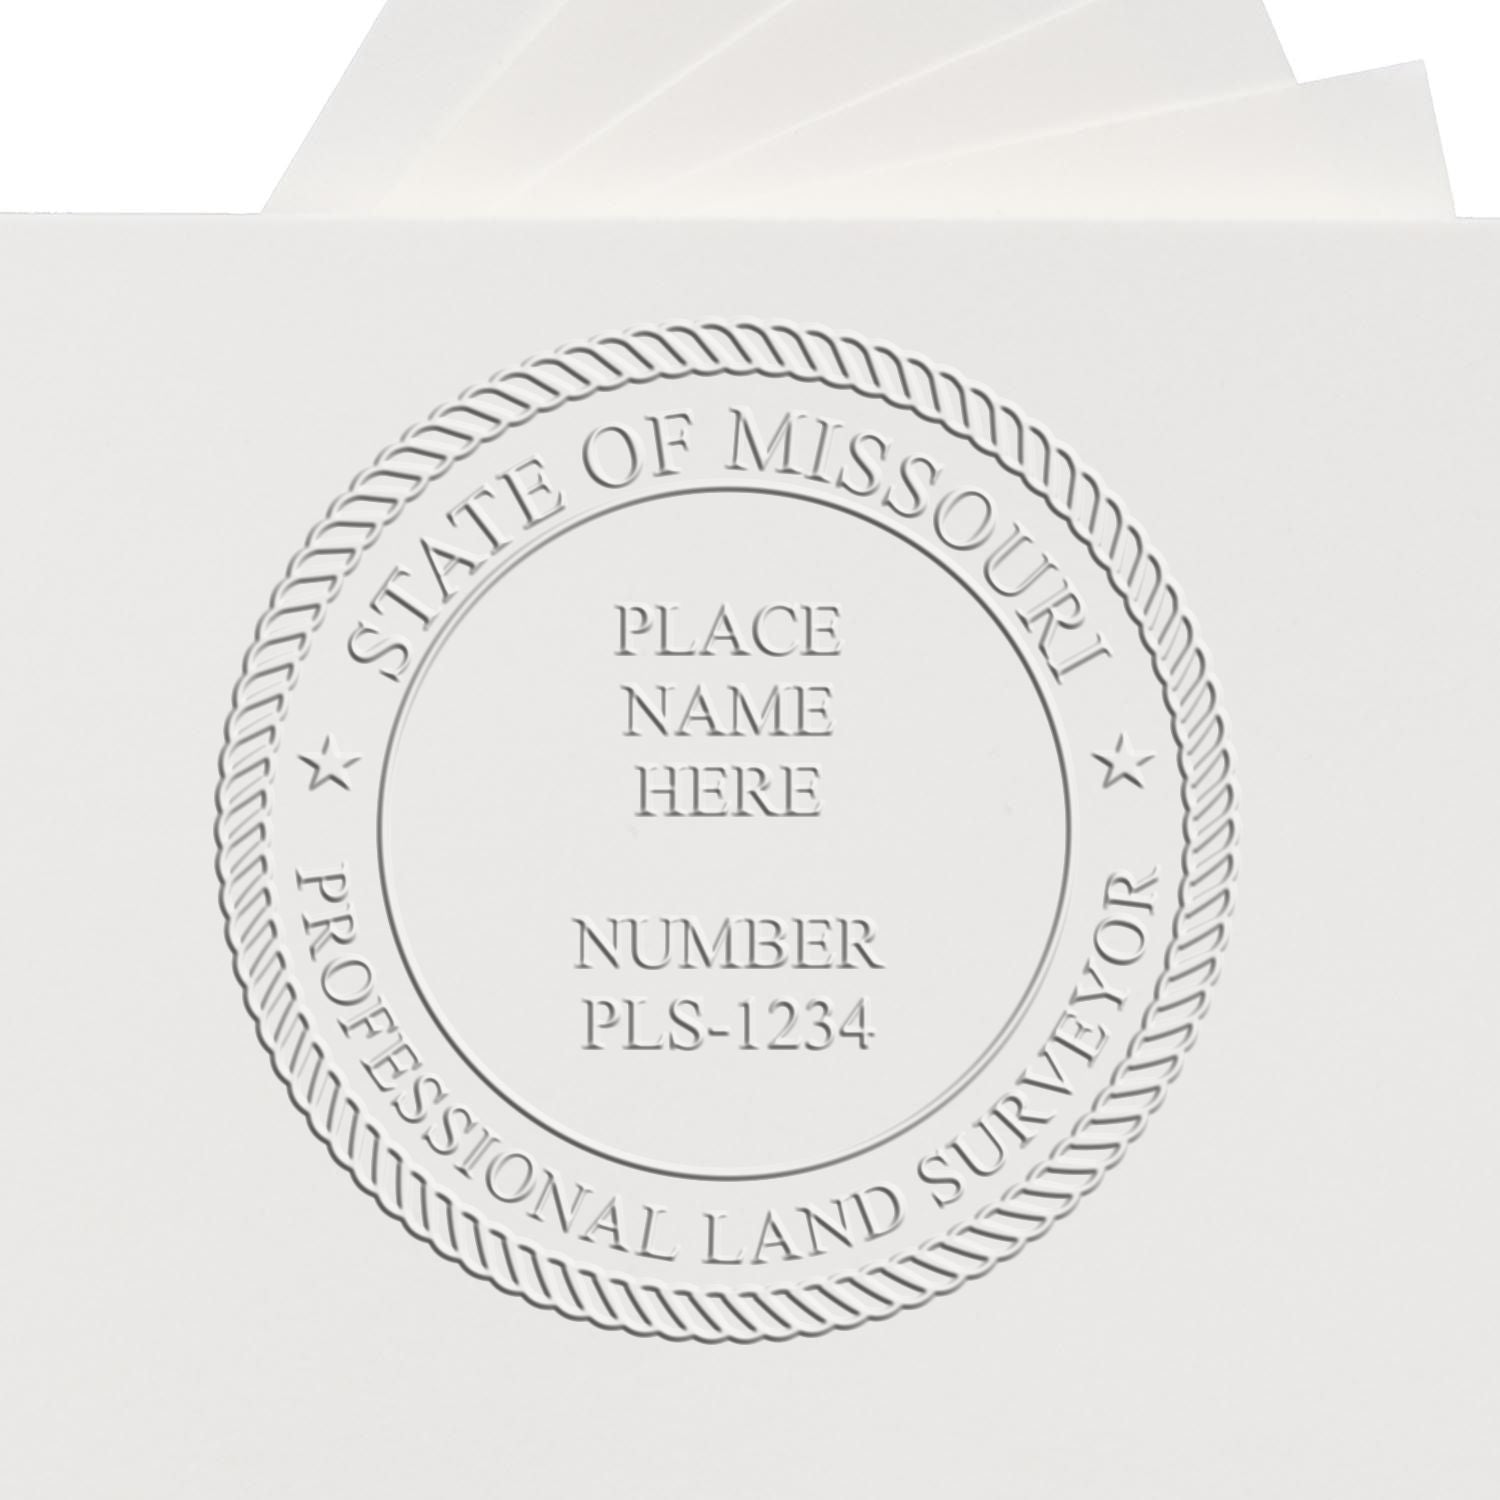 A stamped imprint of the Gift Missouri Land Surveyor Seal in this stylish lifestyle photo, setting the tone for a unique and personalized product.